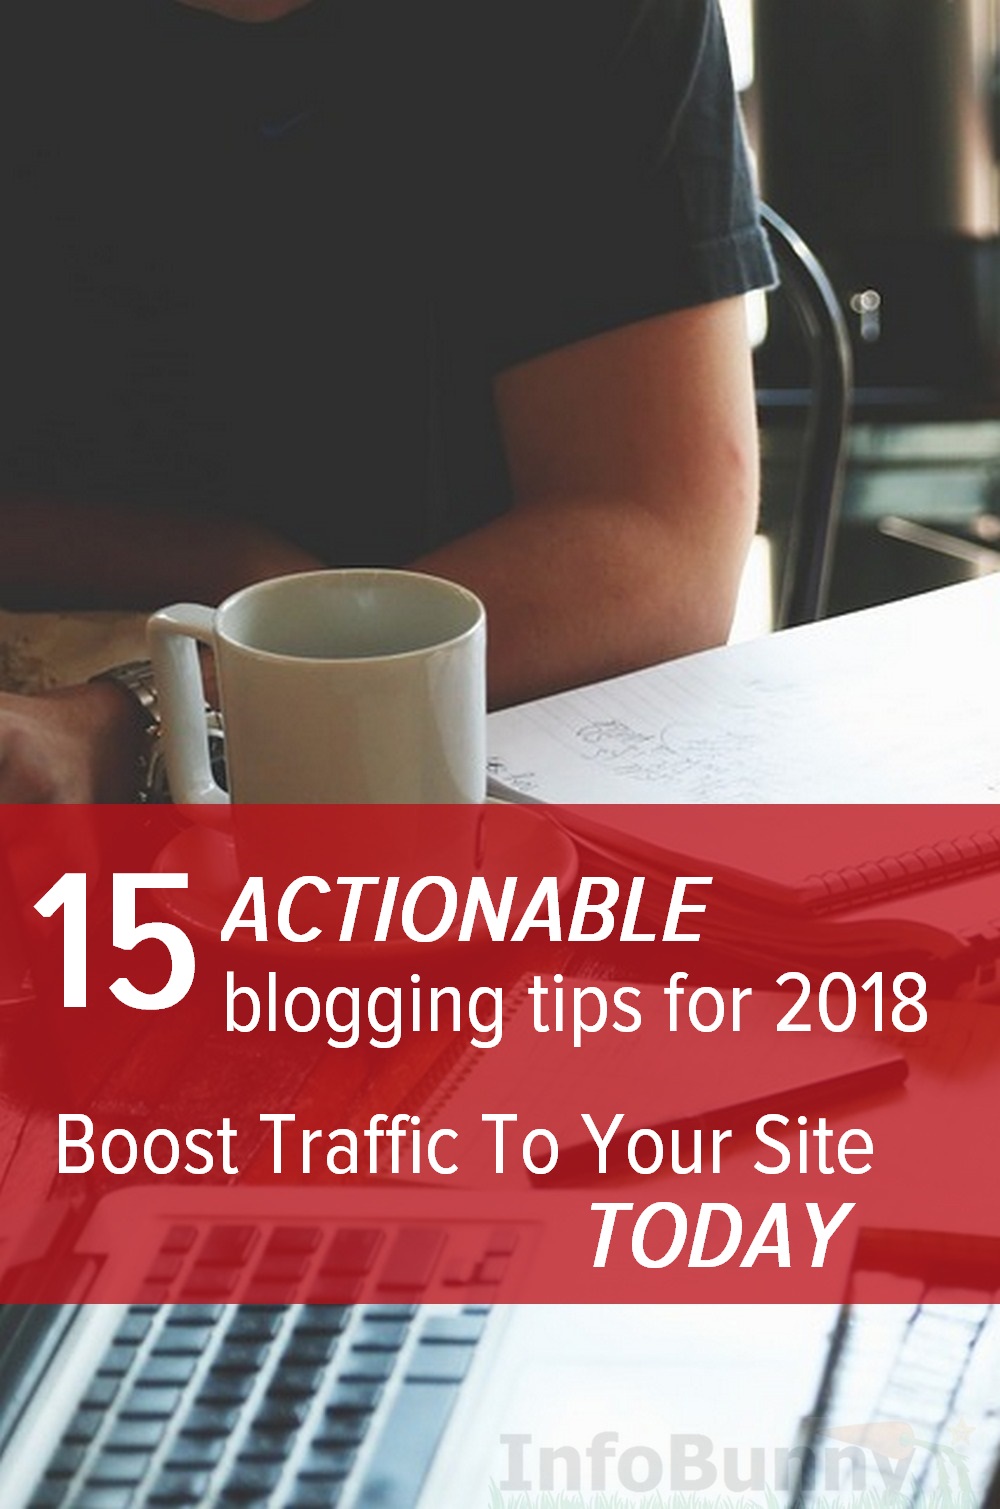 15 actionable blogging tips for 2018